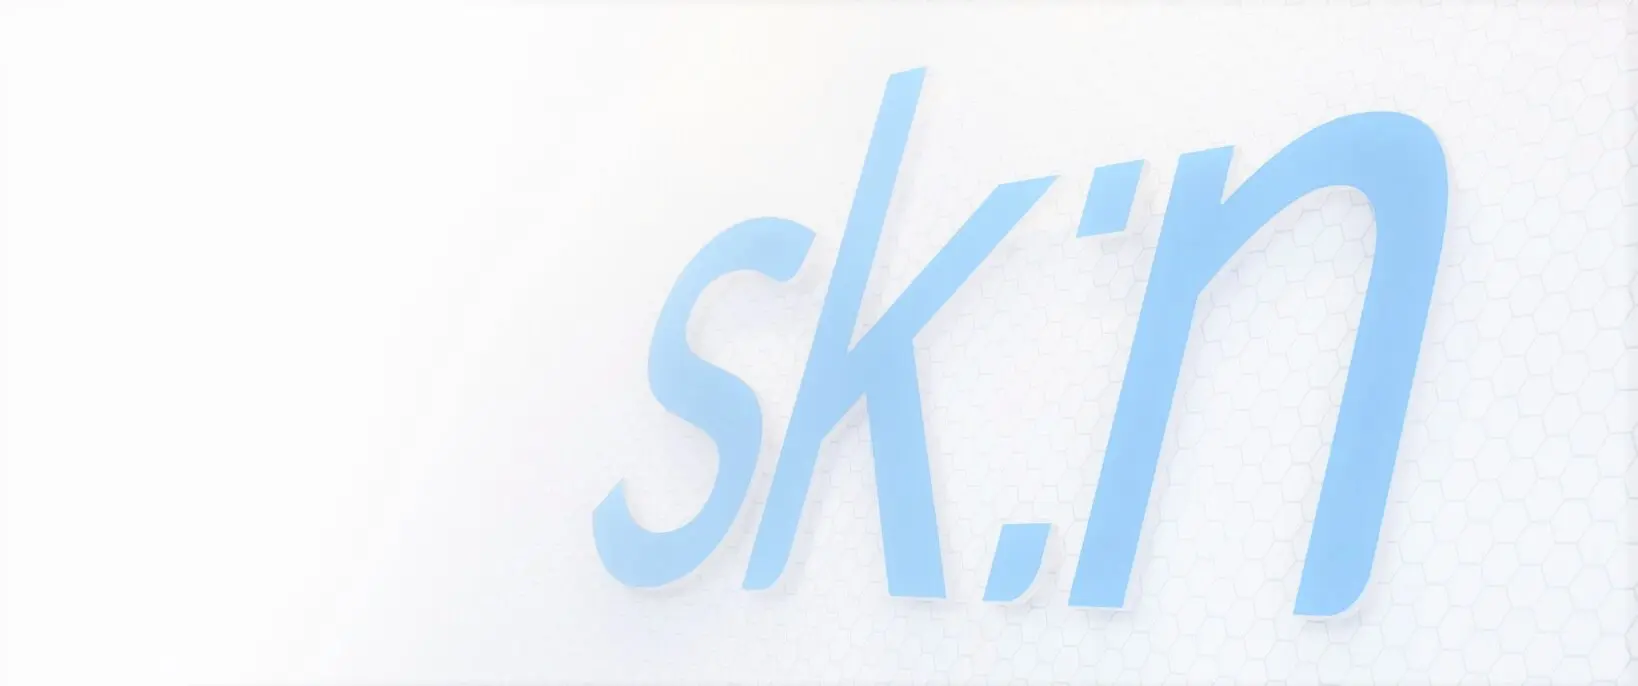 Graphic background image showing the skin clinics logo on a white background